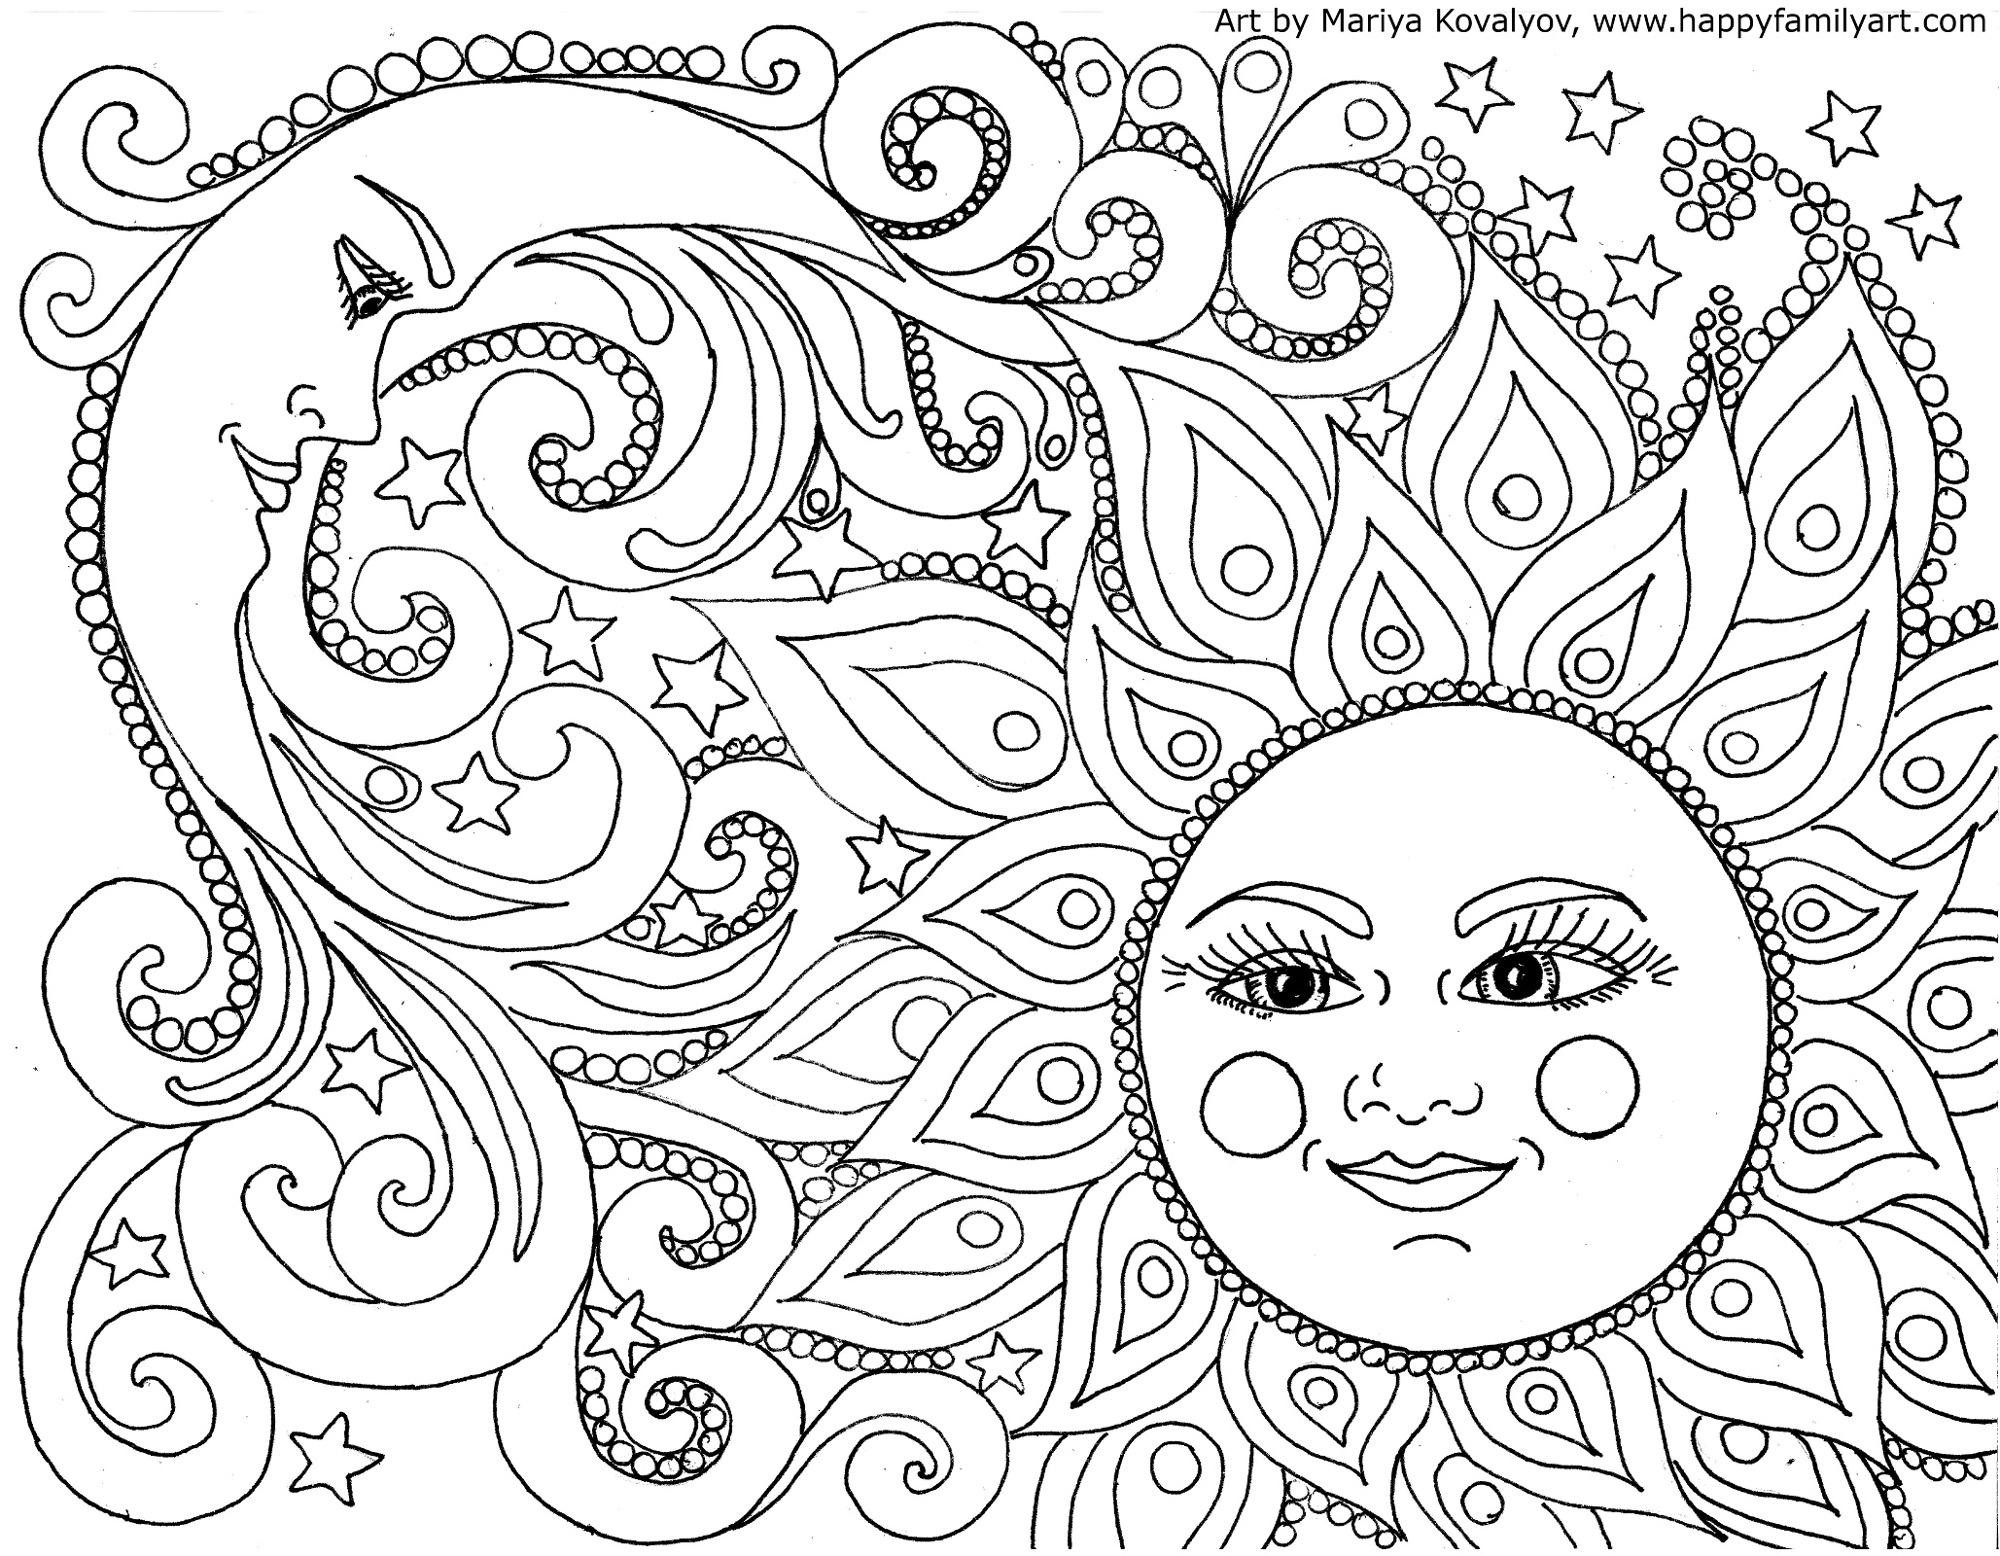 Happy Family Art - Original And Fun Coloring Pages - Free Coloring Pages Com Printable